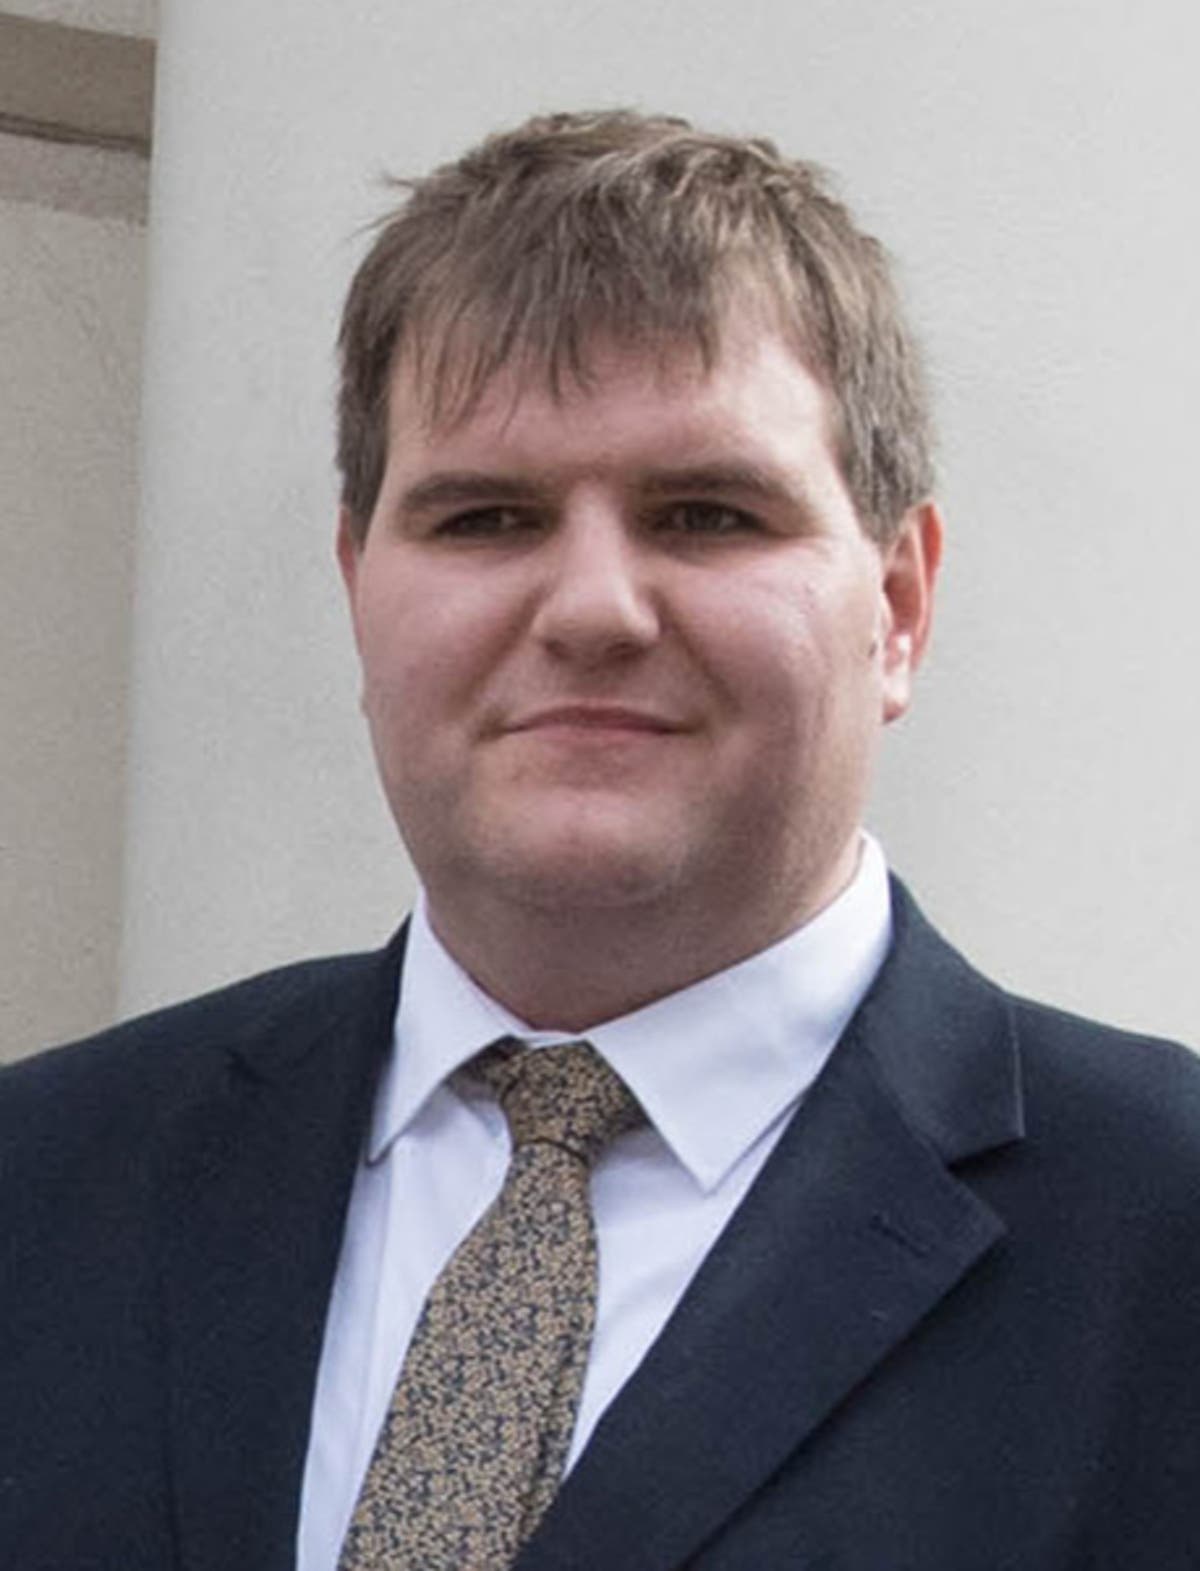 Tory MP Jamie Wallis to go on trial over late-night crash